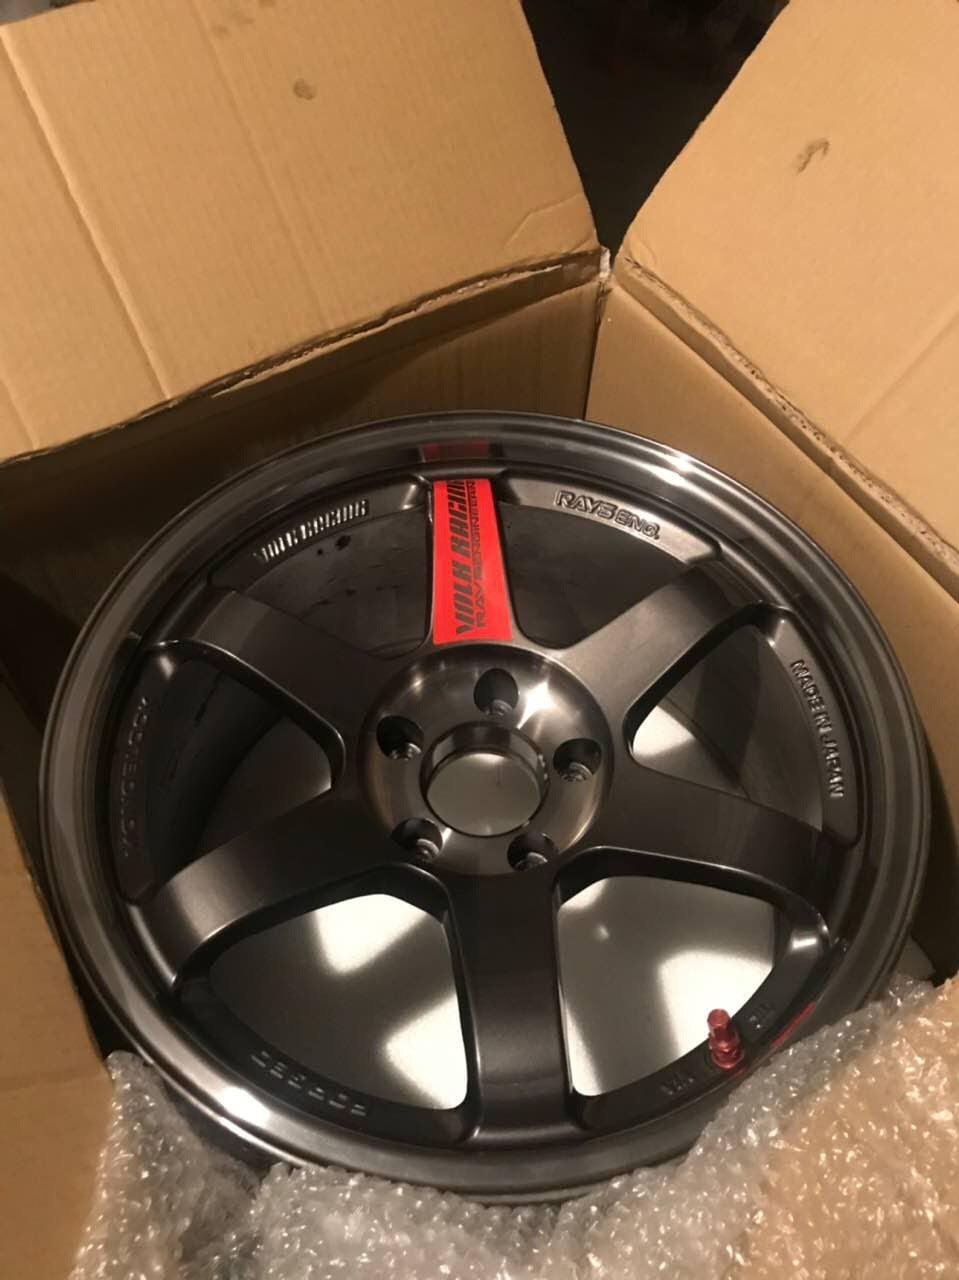 Wheels and Tires/Axles - For Sale: Rays TE37SL R17x9.5  +12 [5x114.3] - Used - 2006 to 2012 Mitsubishi Lancer Evolution - Kaluga, Russian Federation